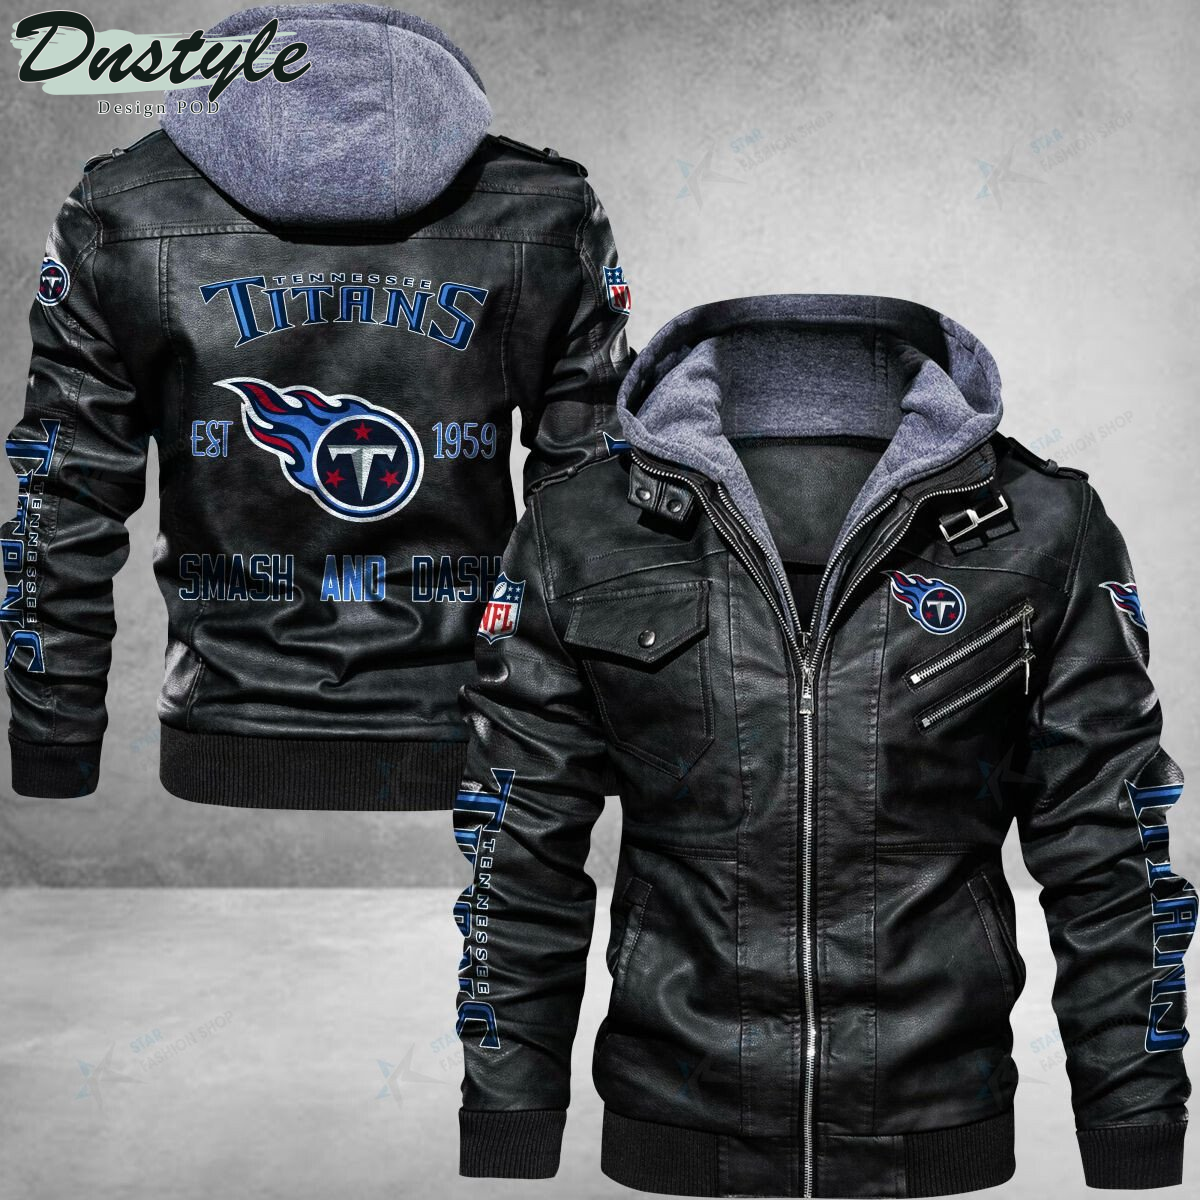 Tennessee Titans Smash And Dash Leather Jacket